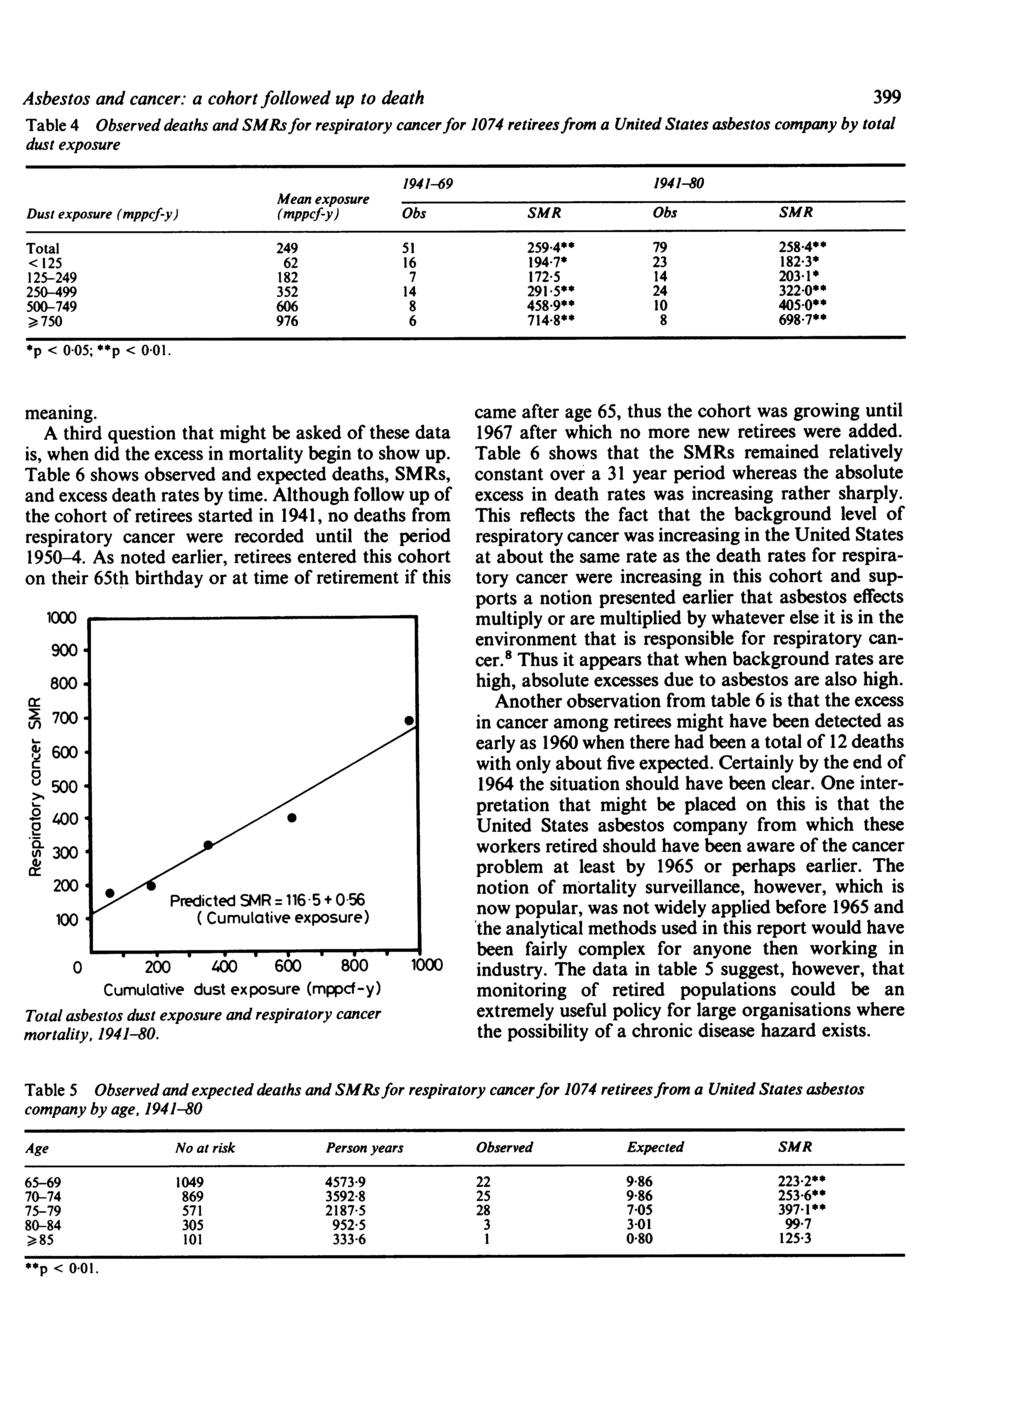 Asbestos and cancer: a cohort followed up to death 399 Table 4 Observed deaths and SMRsfor respiratory cancerfor 1074 retireesfrom a United States asbestos company by total dust exposure 1941-69